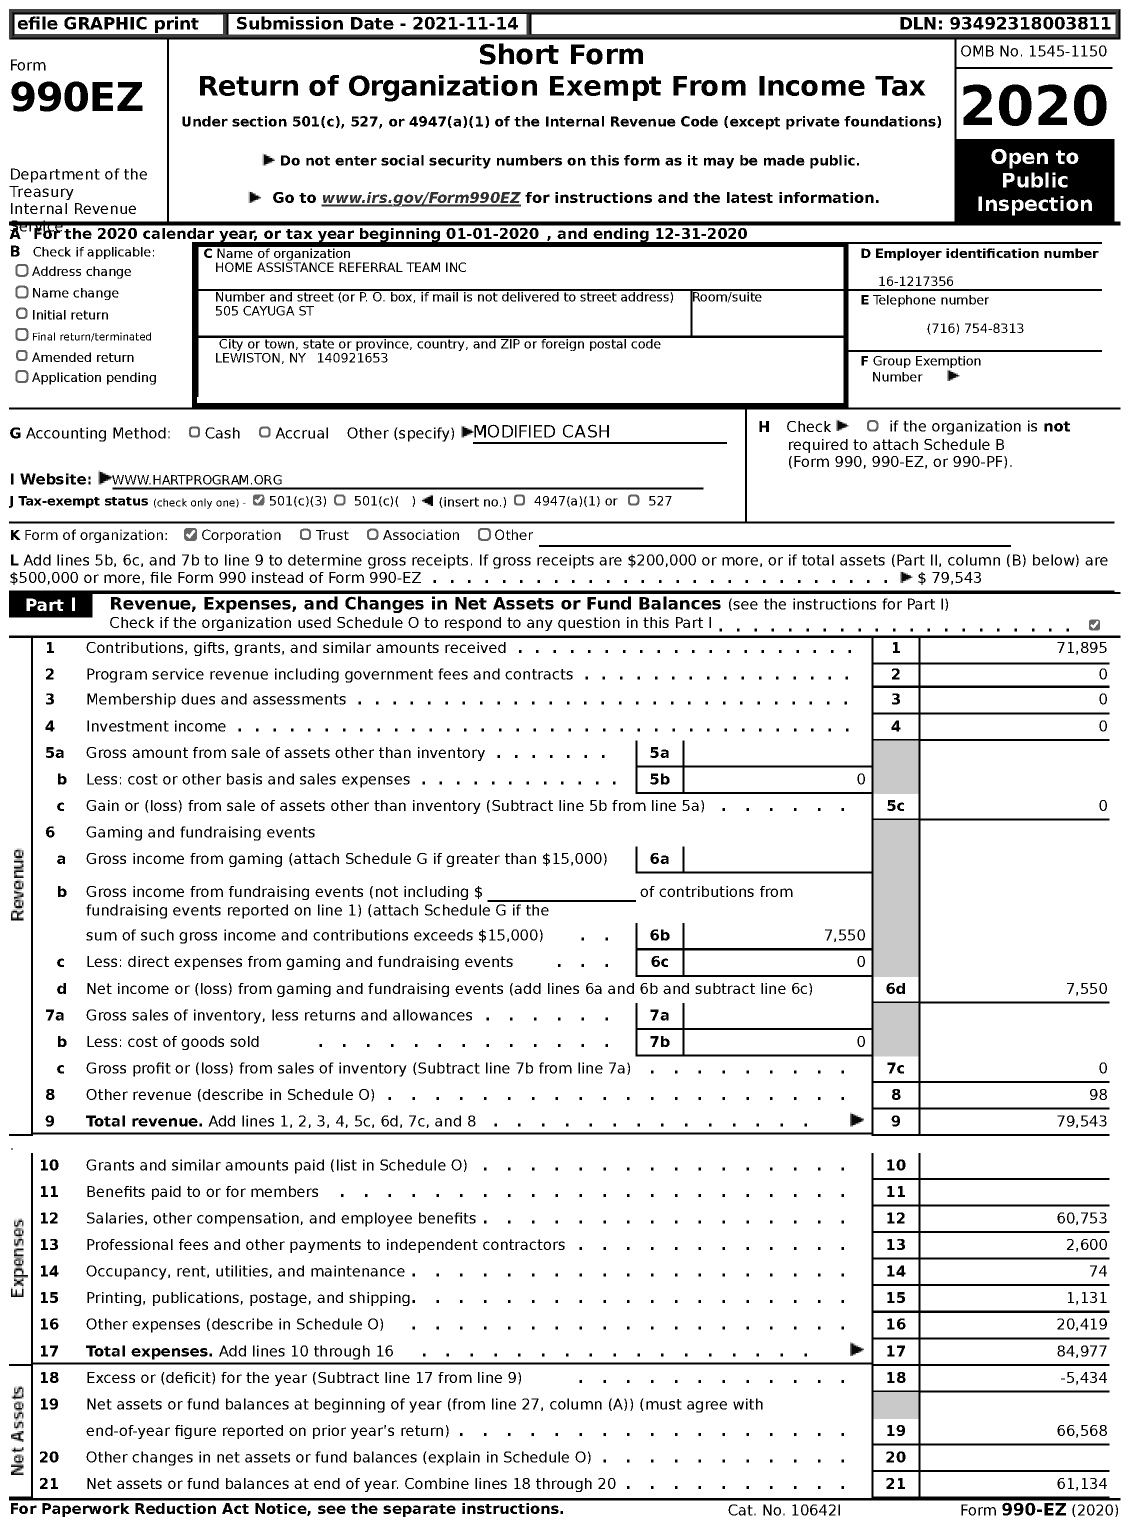 Image of first page of 2020 Form 990EZ for Home Assistance Referral Team